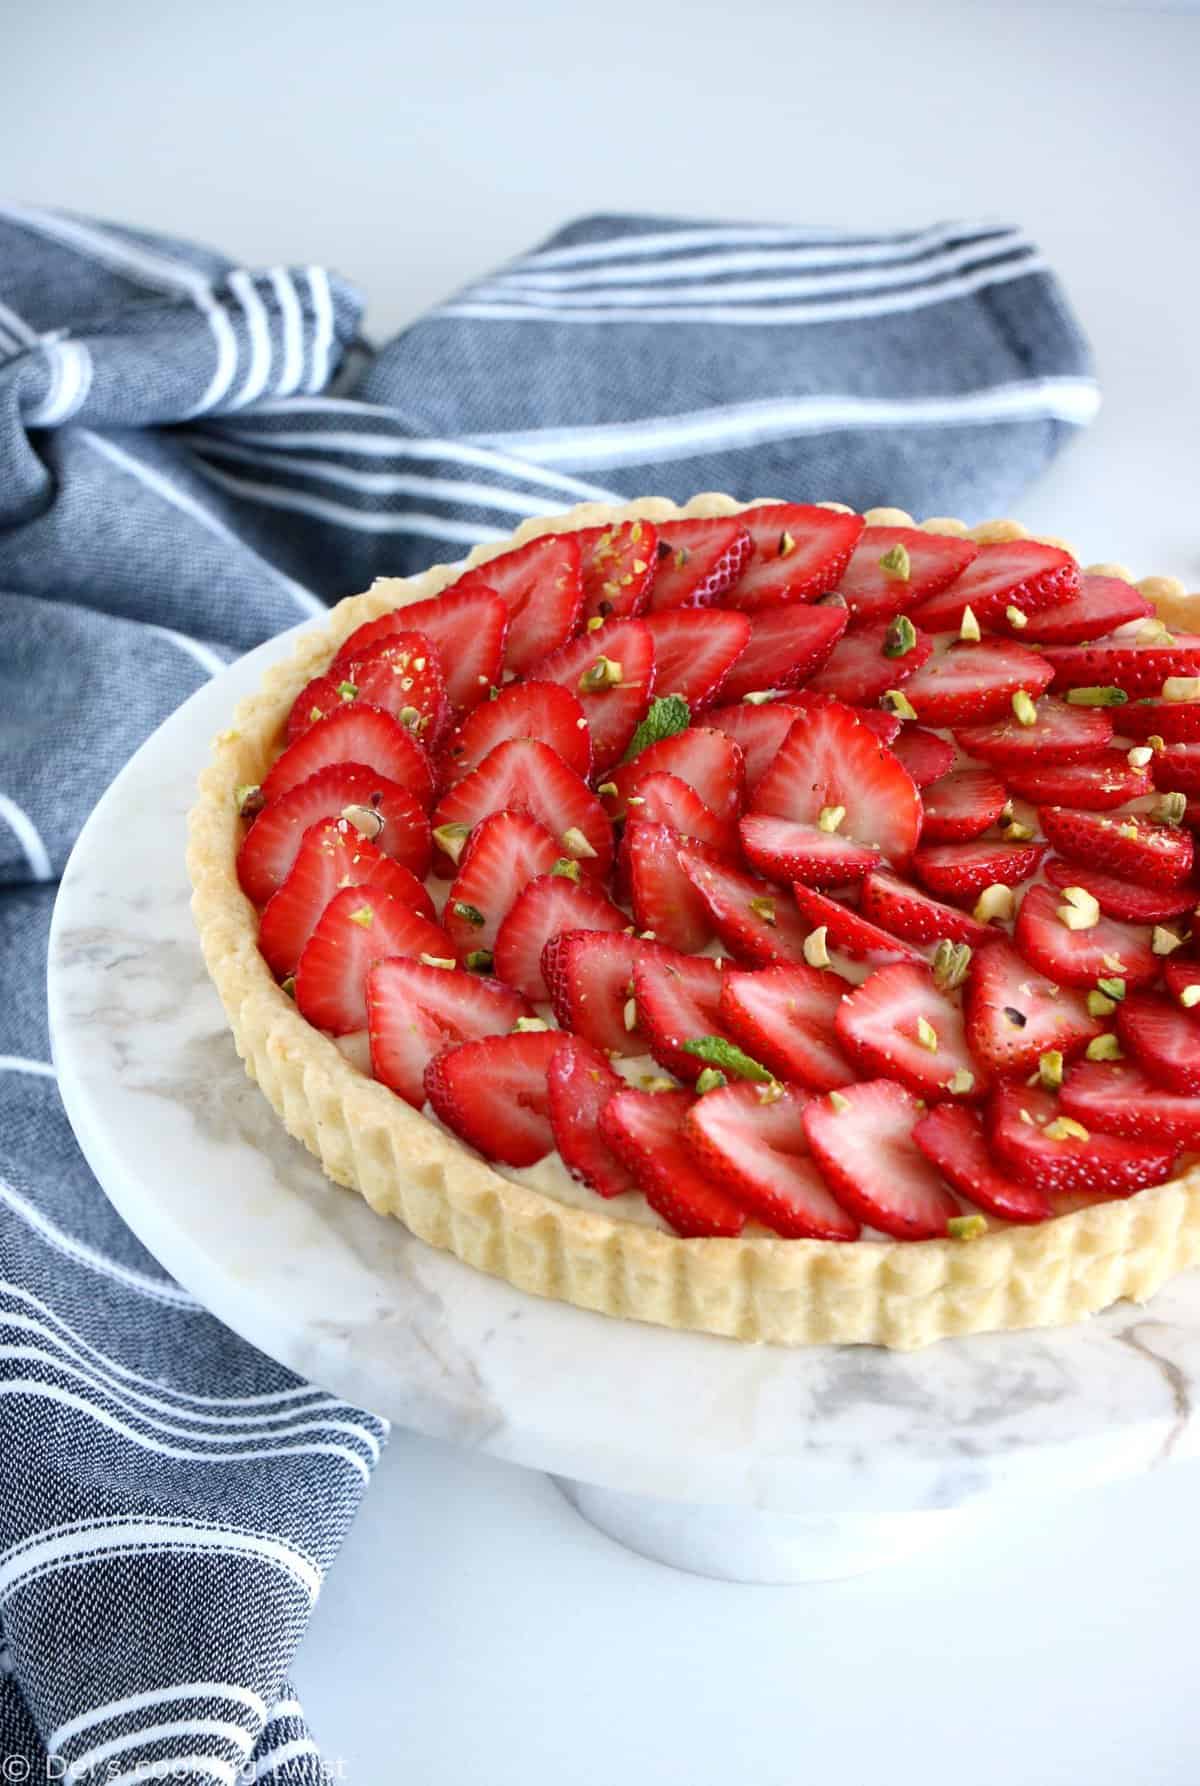 French Strawberry Tart with Pastry Cream